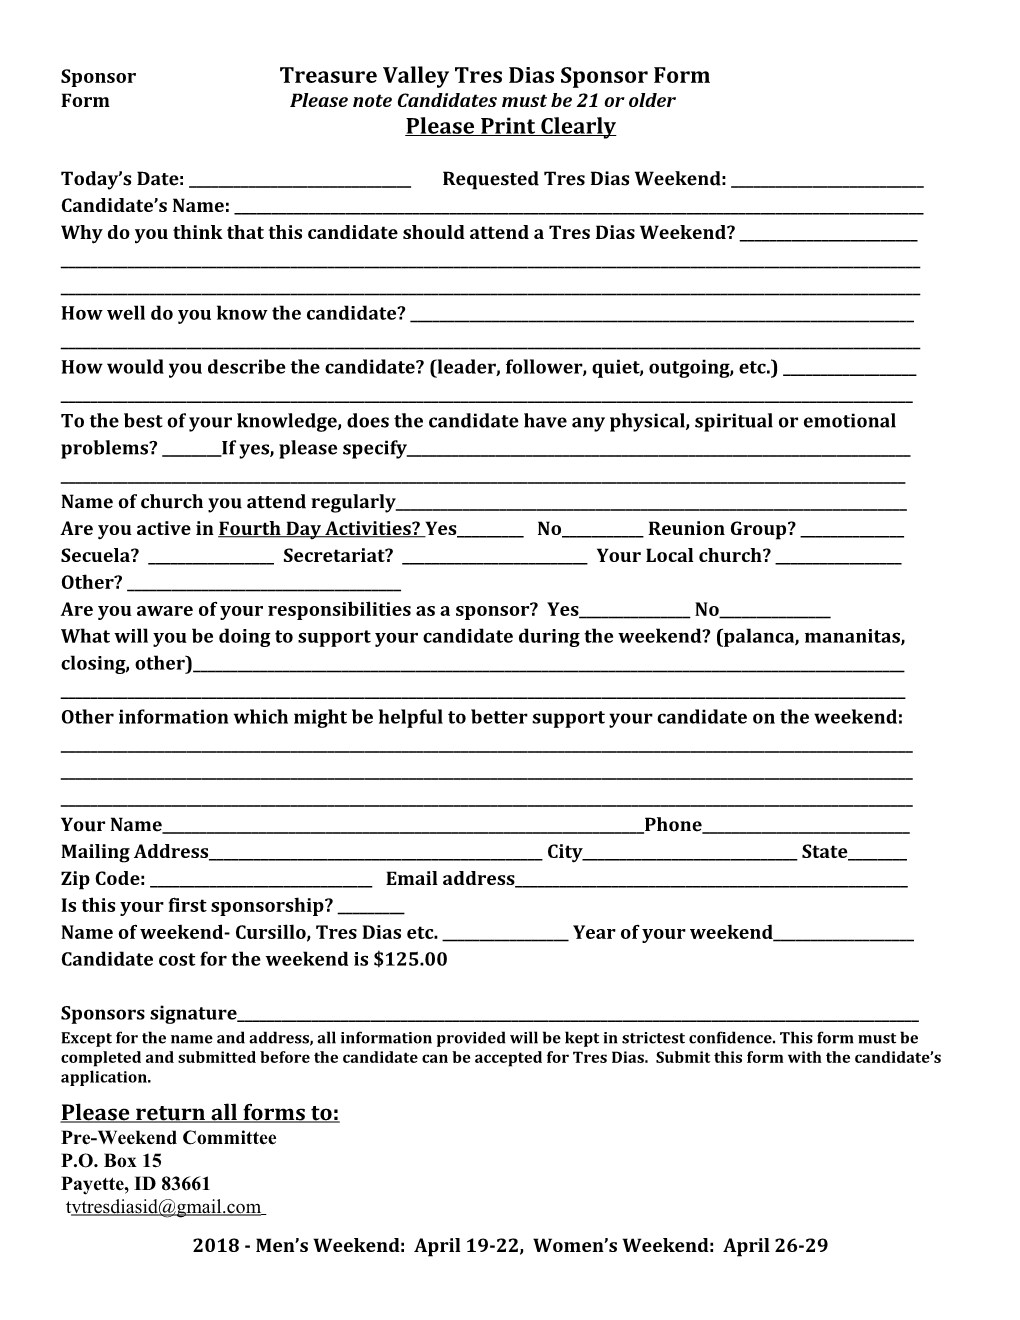 Sponsorship Guidelines and Form 1